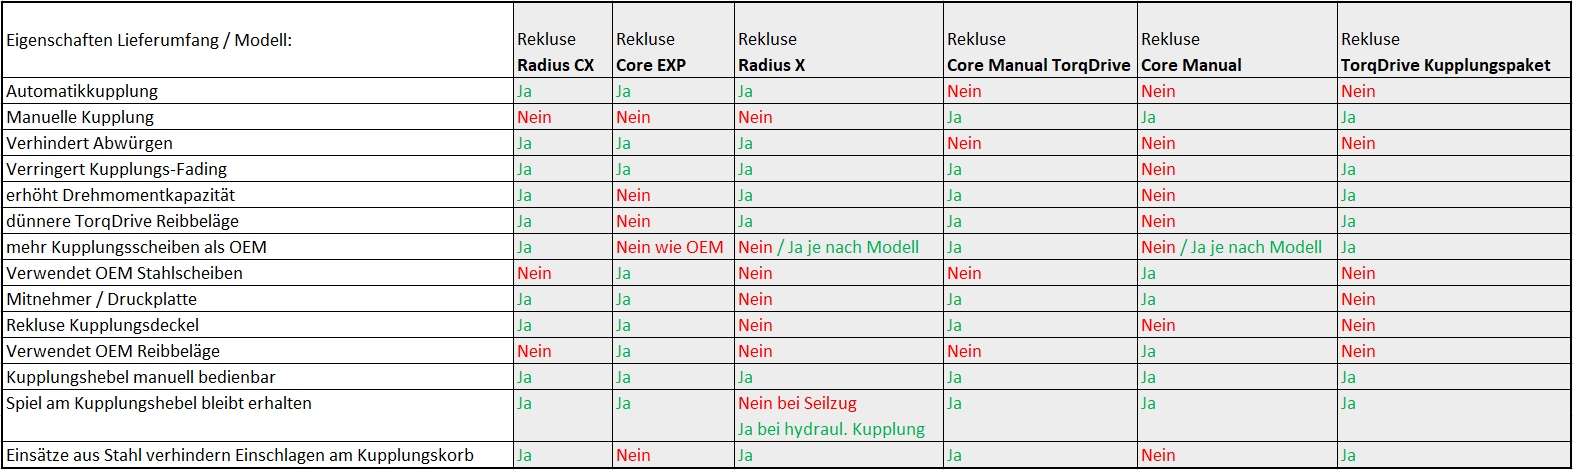 Rekluse Overview